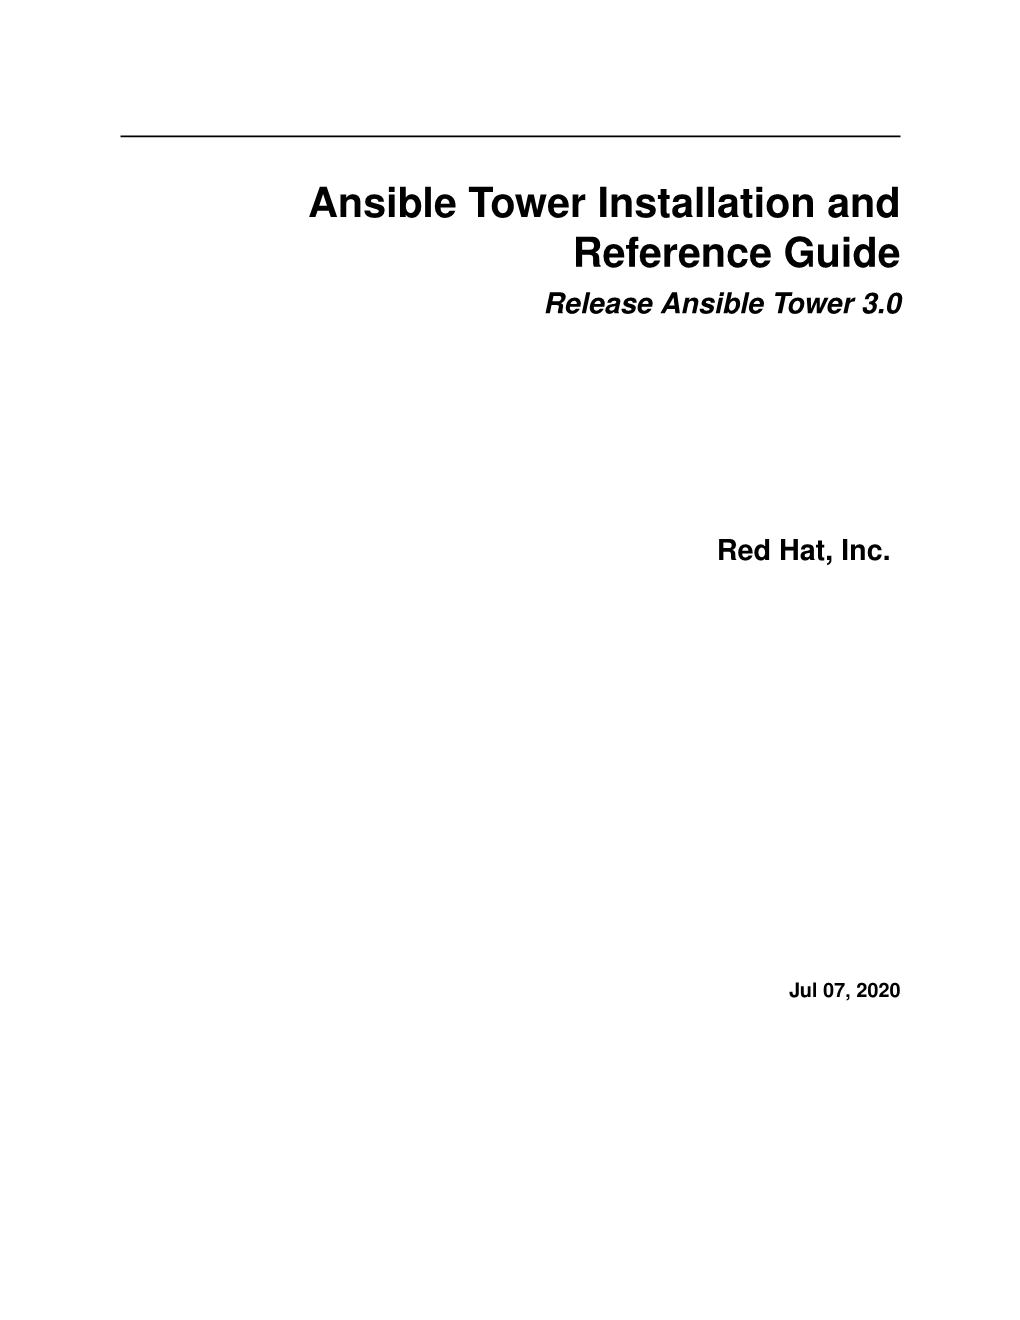 Ansible Tower Installation and Reference Guide Release Ansible Tower 3.0